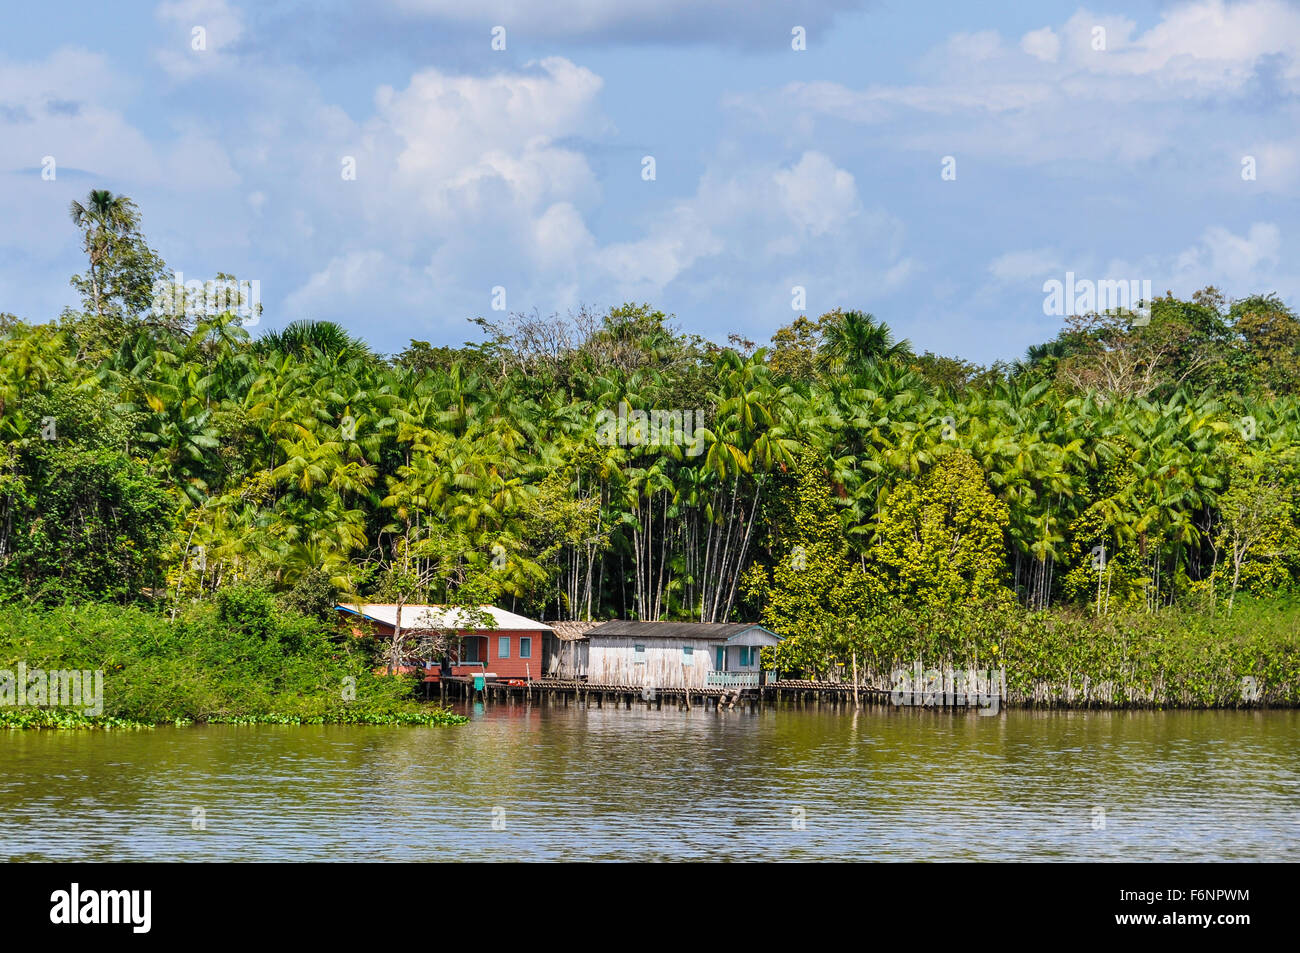 Local hut as seen from the boat on the Amazon River in Brazil. Stock Photo